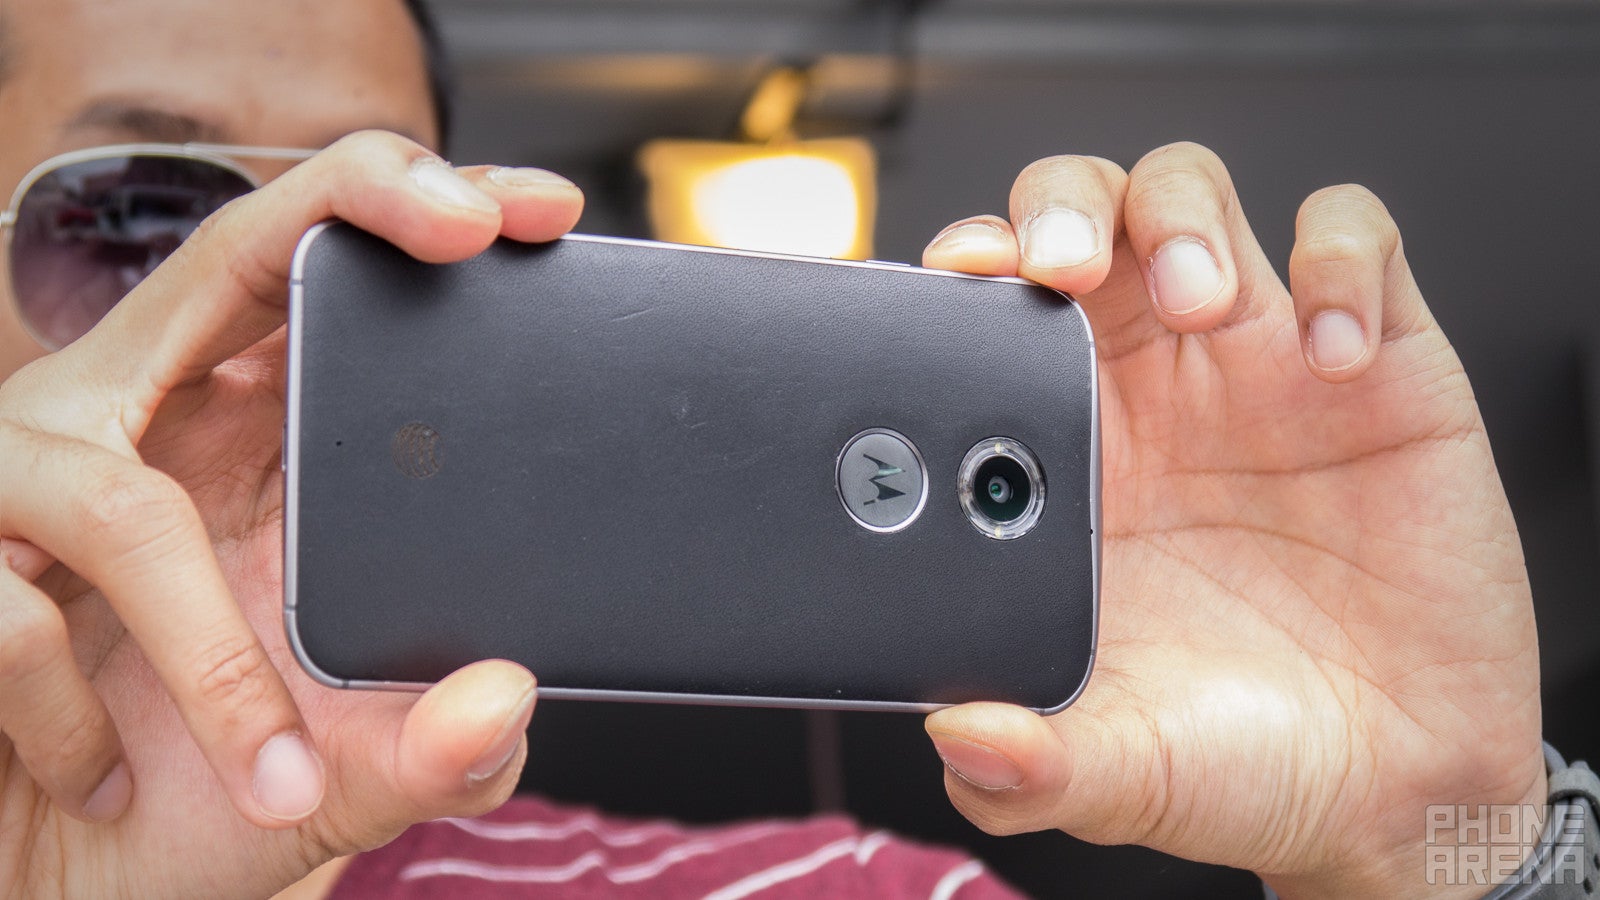 Our Moto X (2014) battery life test is done and the results ain't pretty